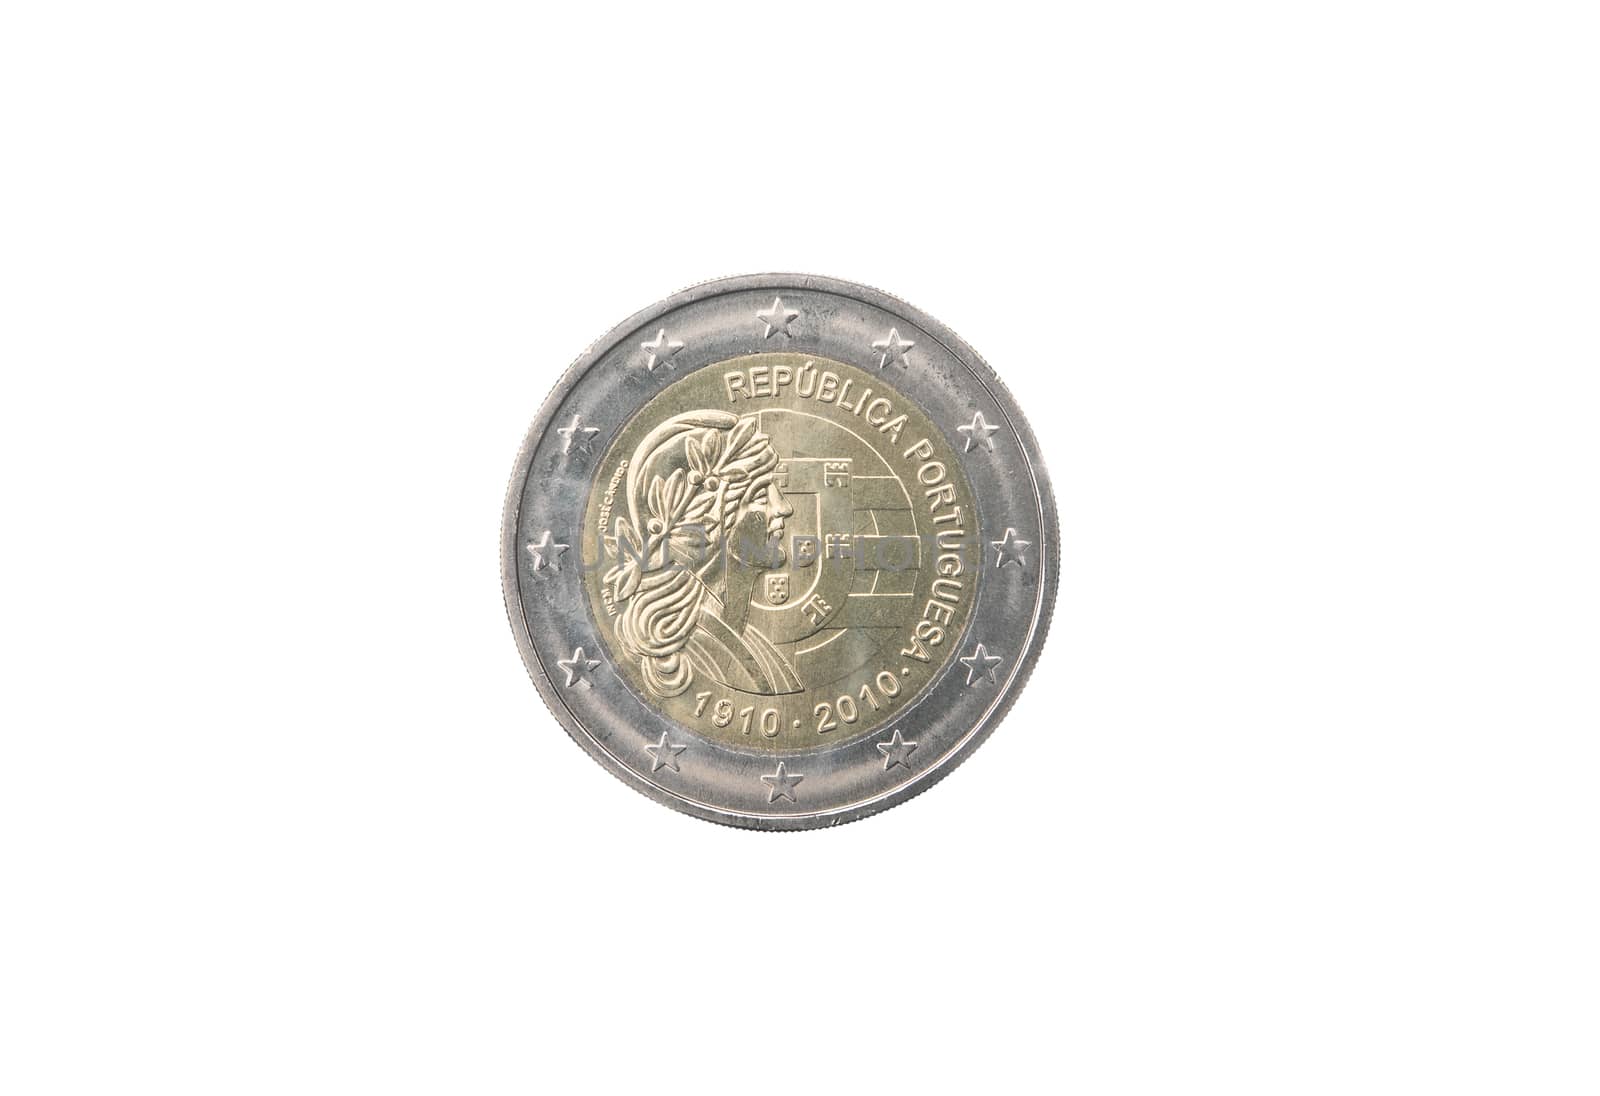 Commemorative coin of Portugal minted in 2010 isolated on white